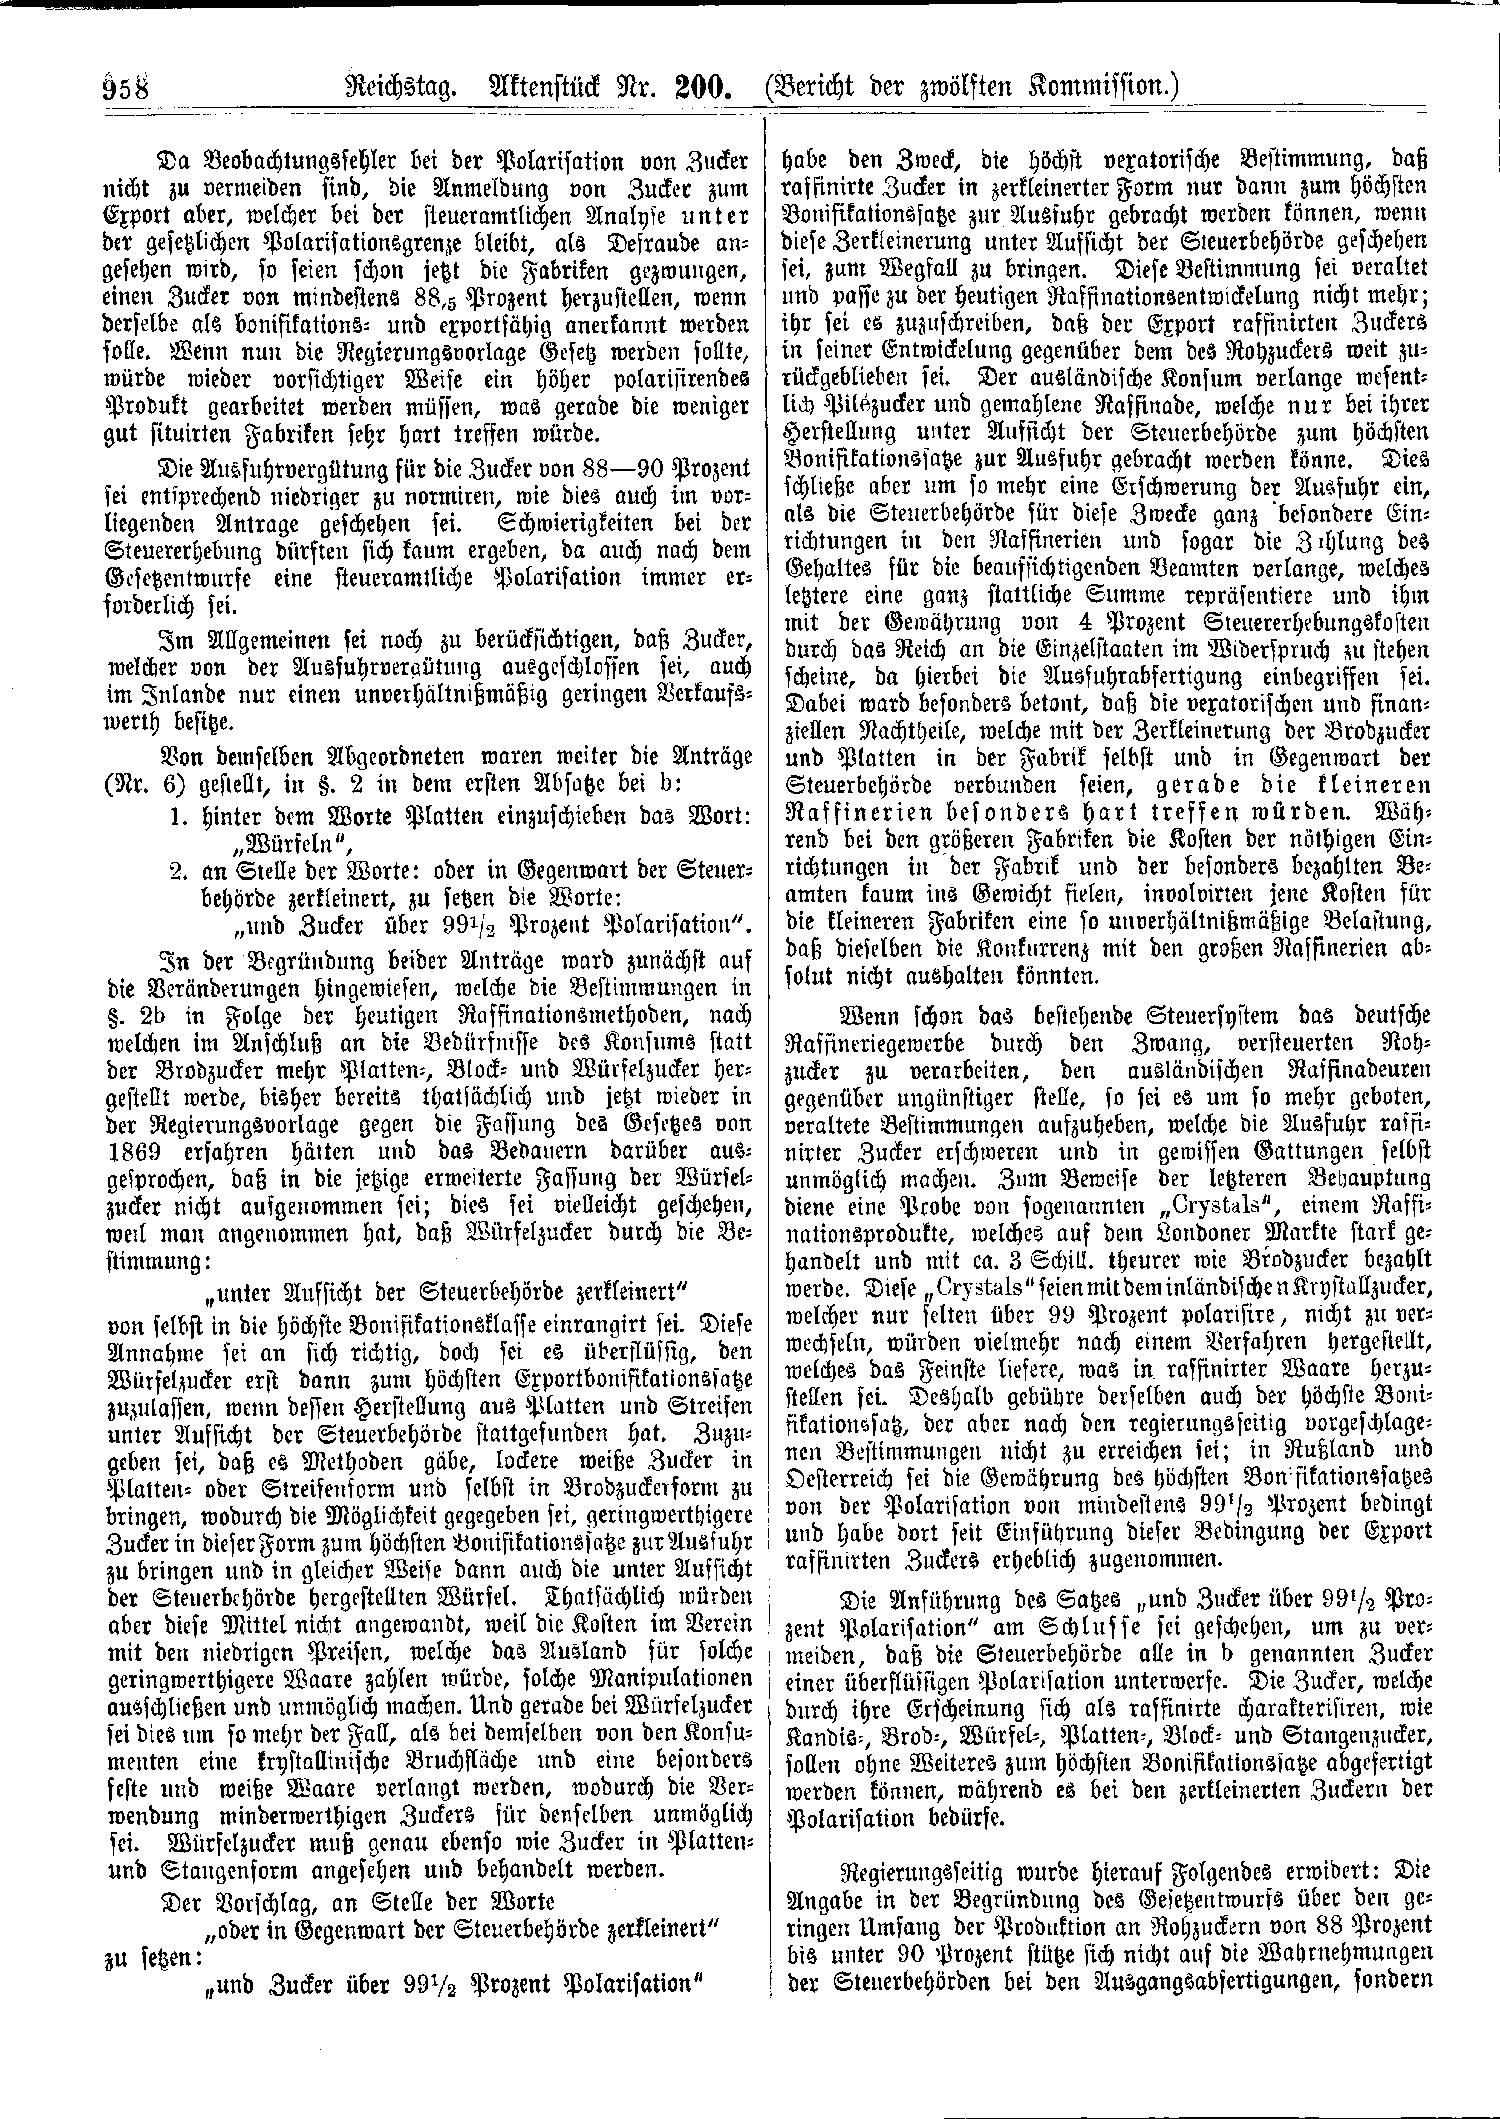 Scan of page 958